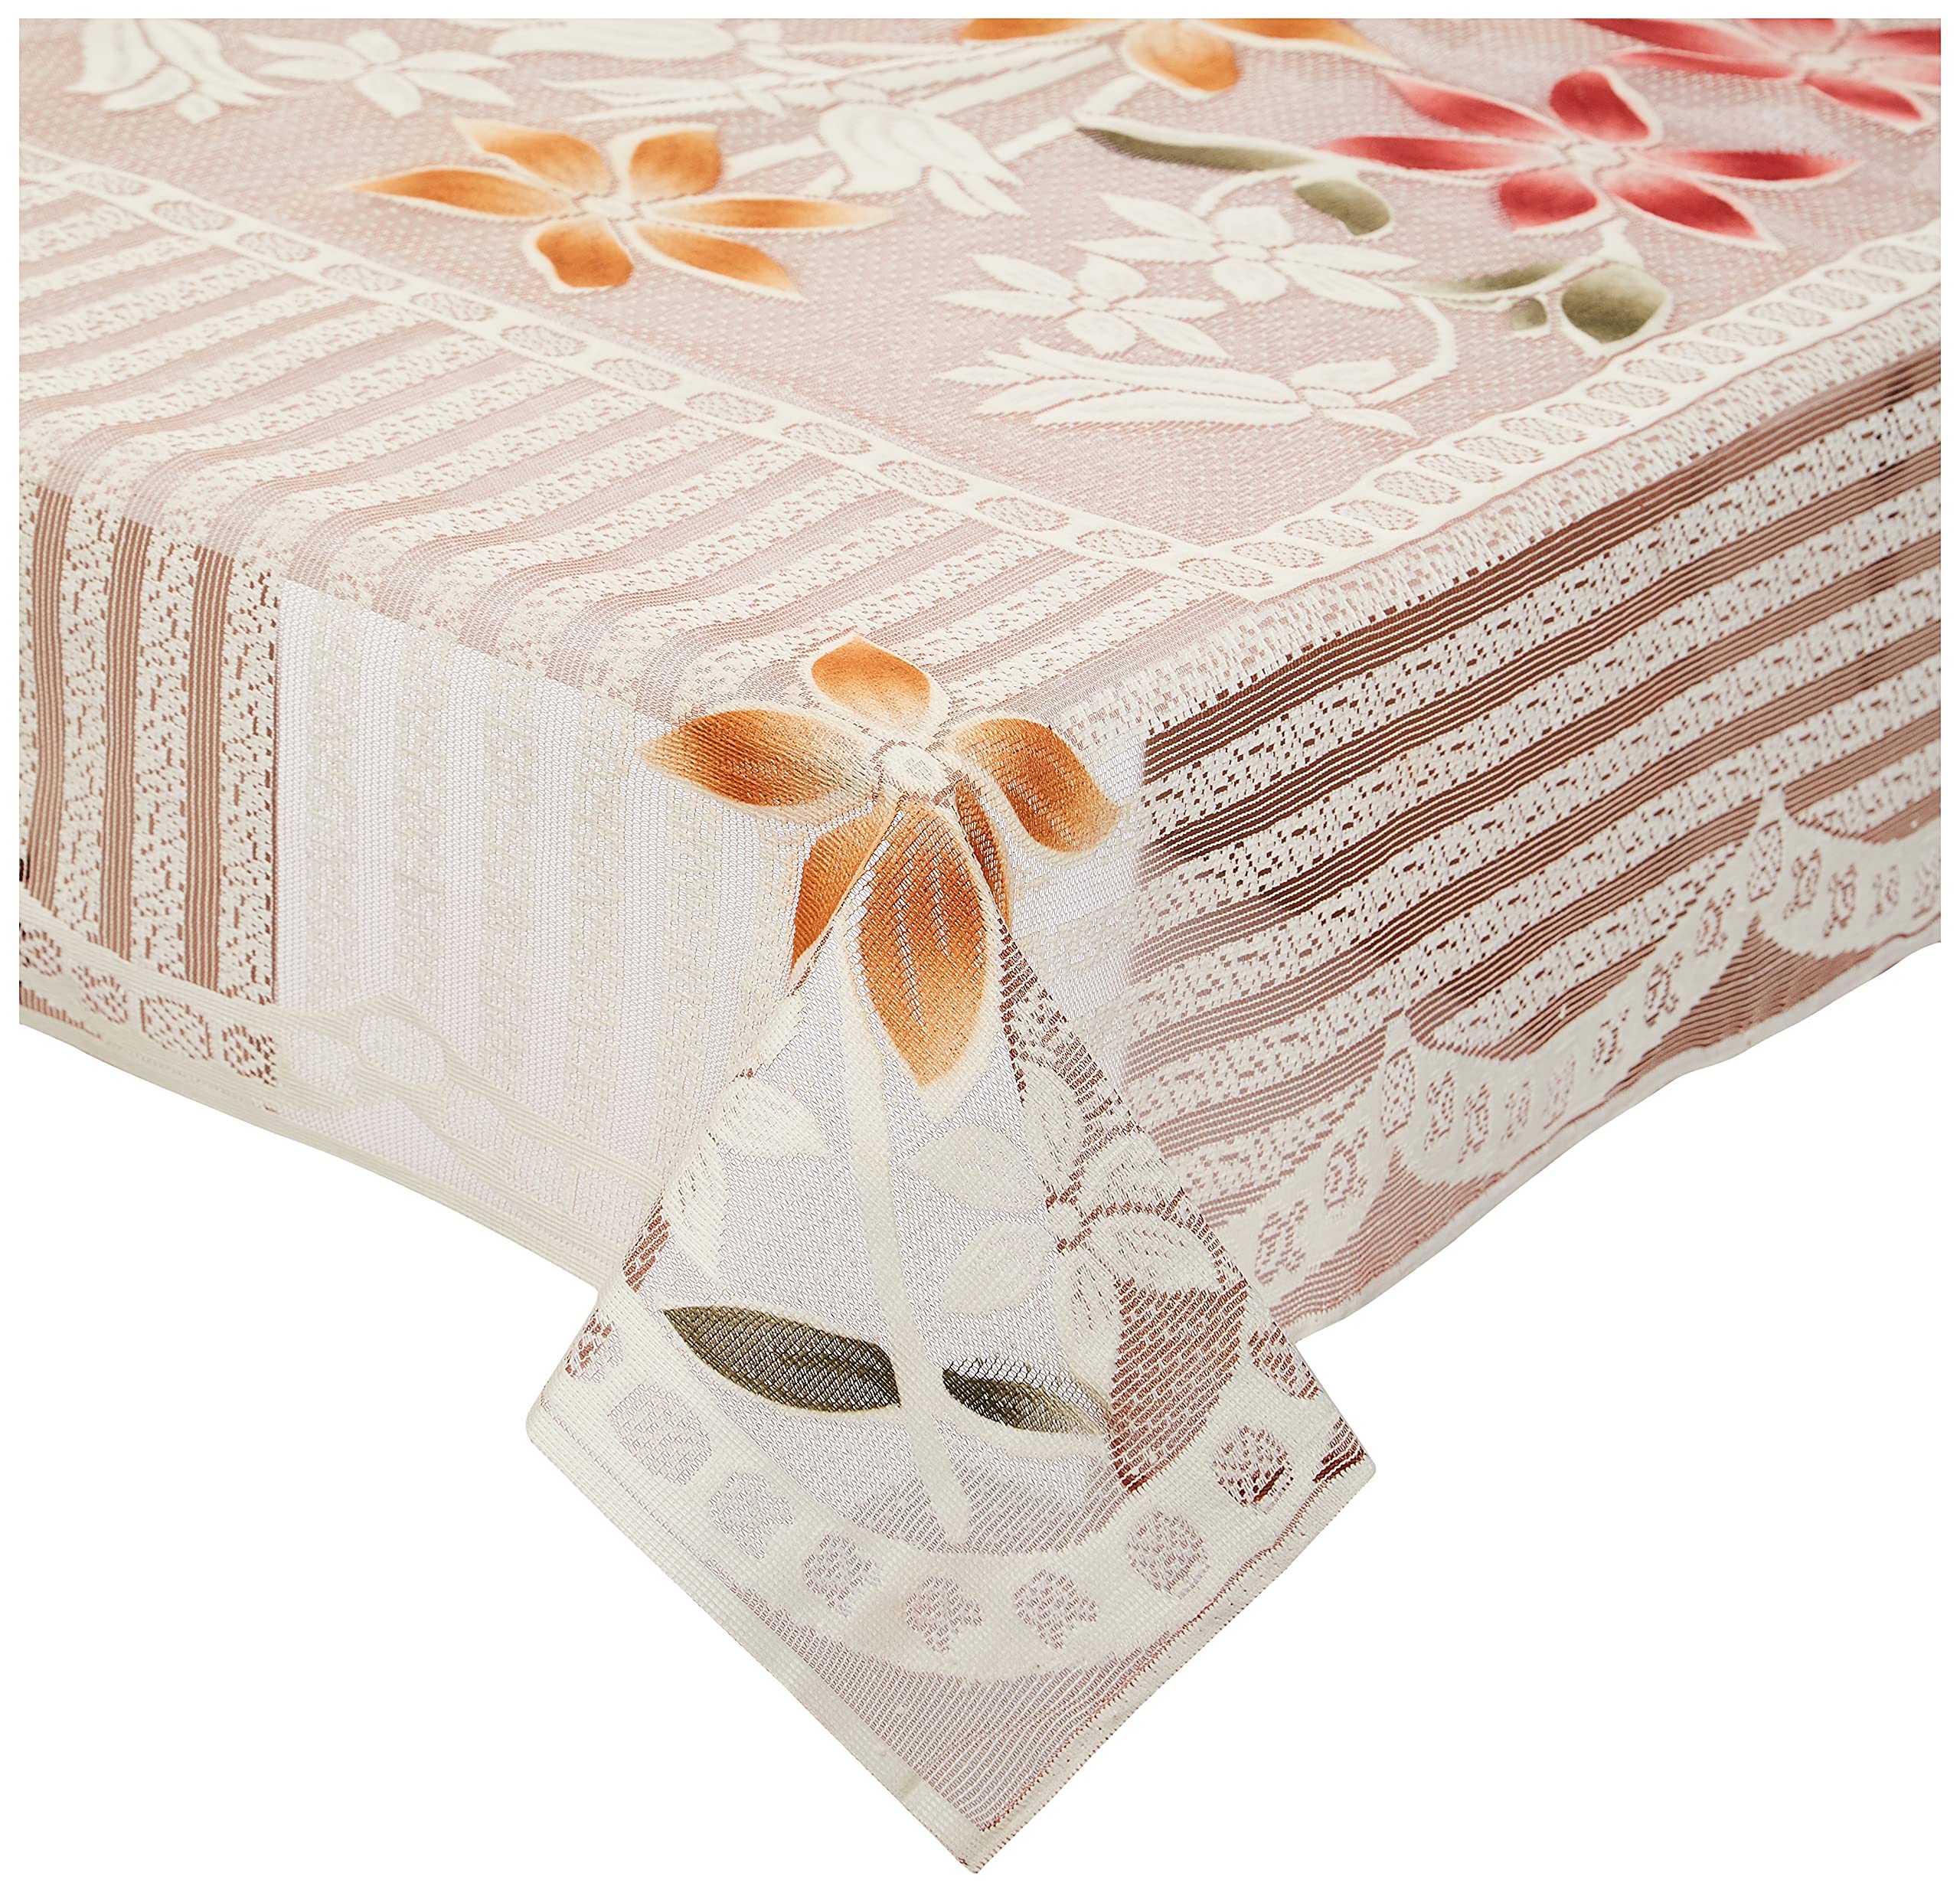 Kuber Industries Cotton Centre Table Cover Set (Brown)